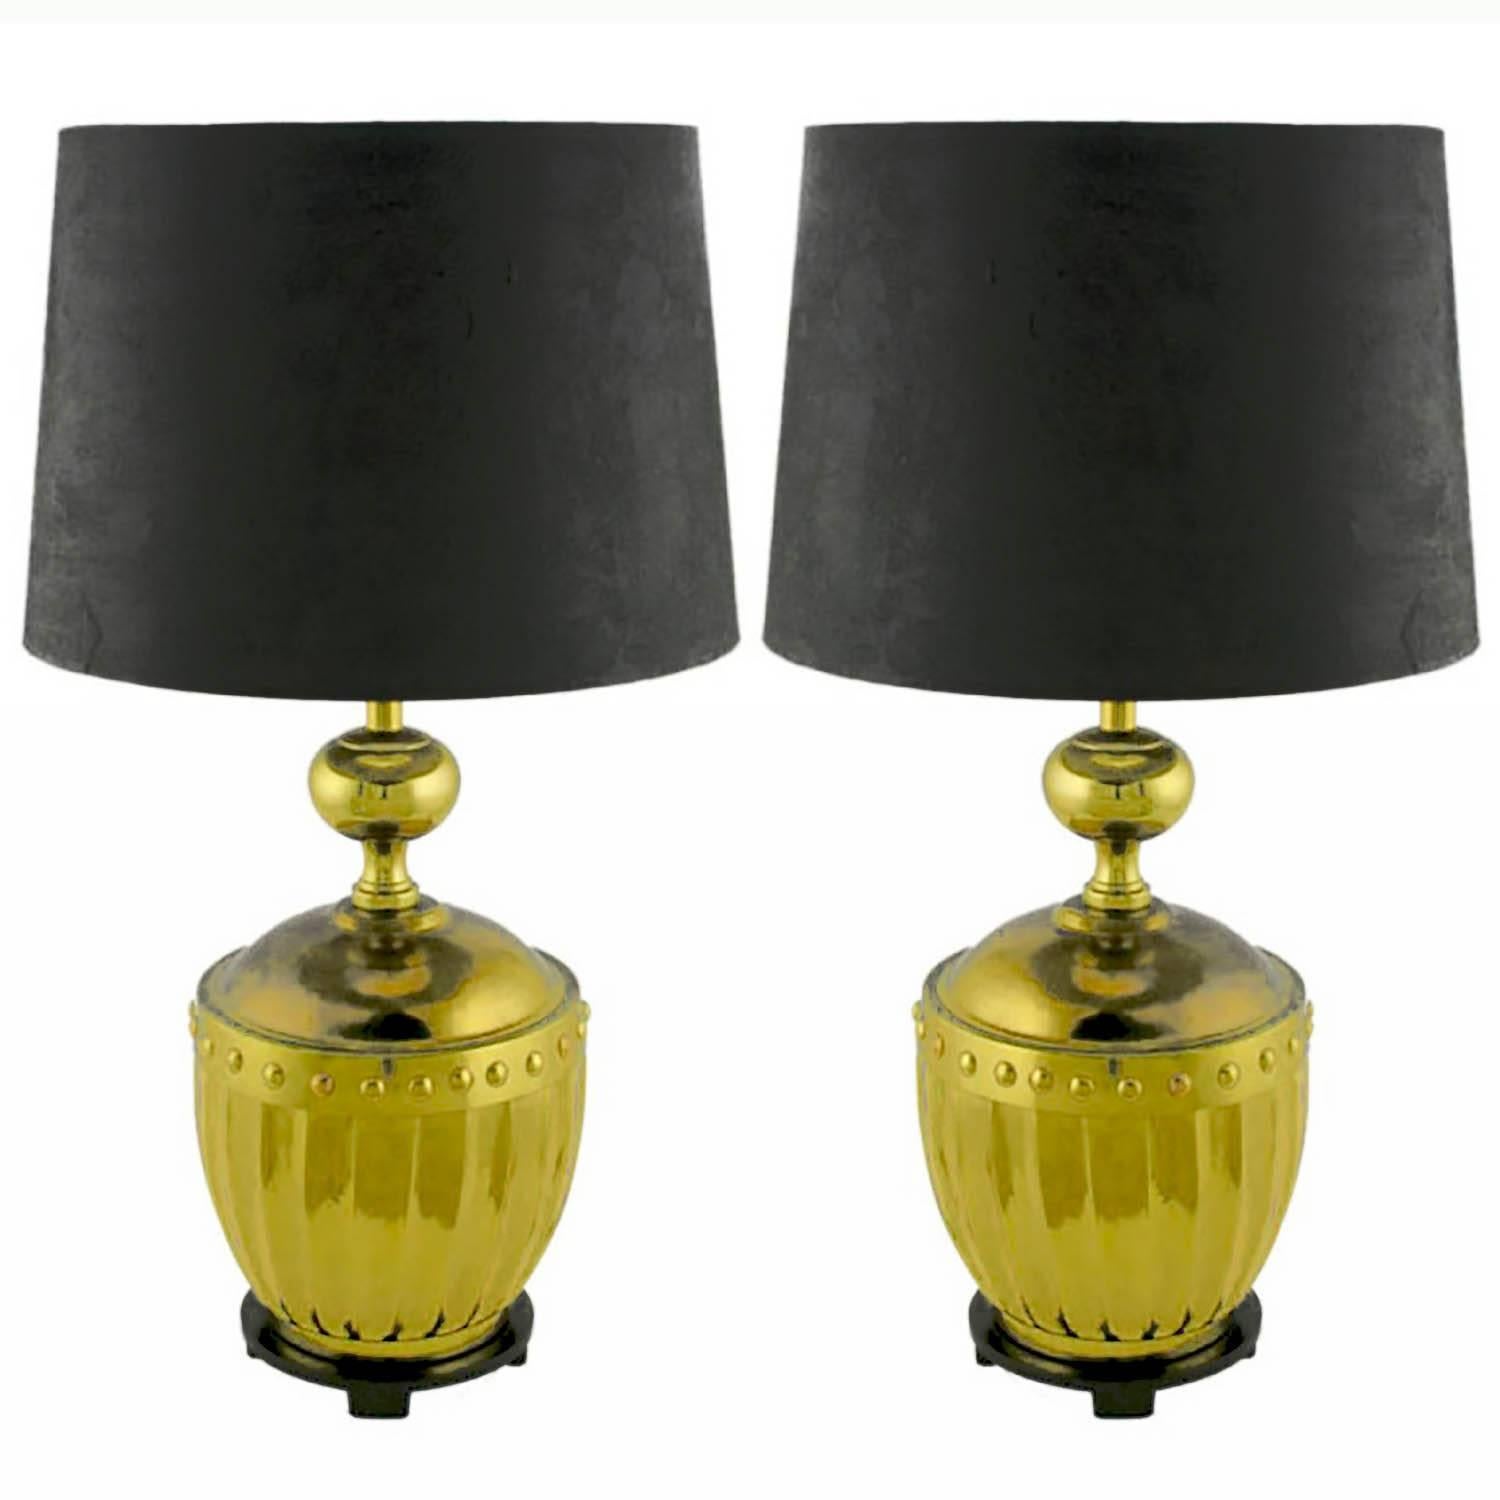 Pair of Stiffel Fluted and Studded Brass Urn Table Lamps